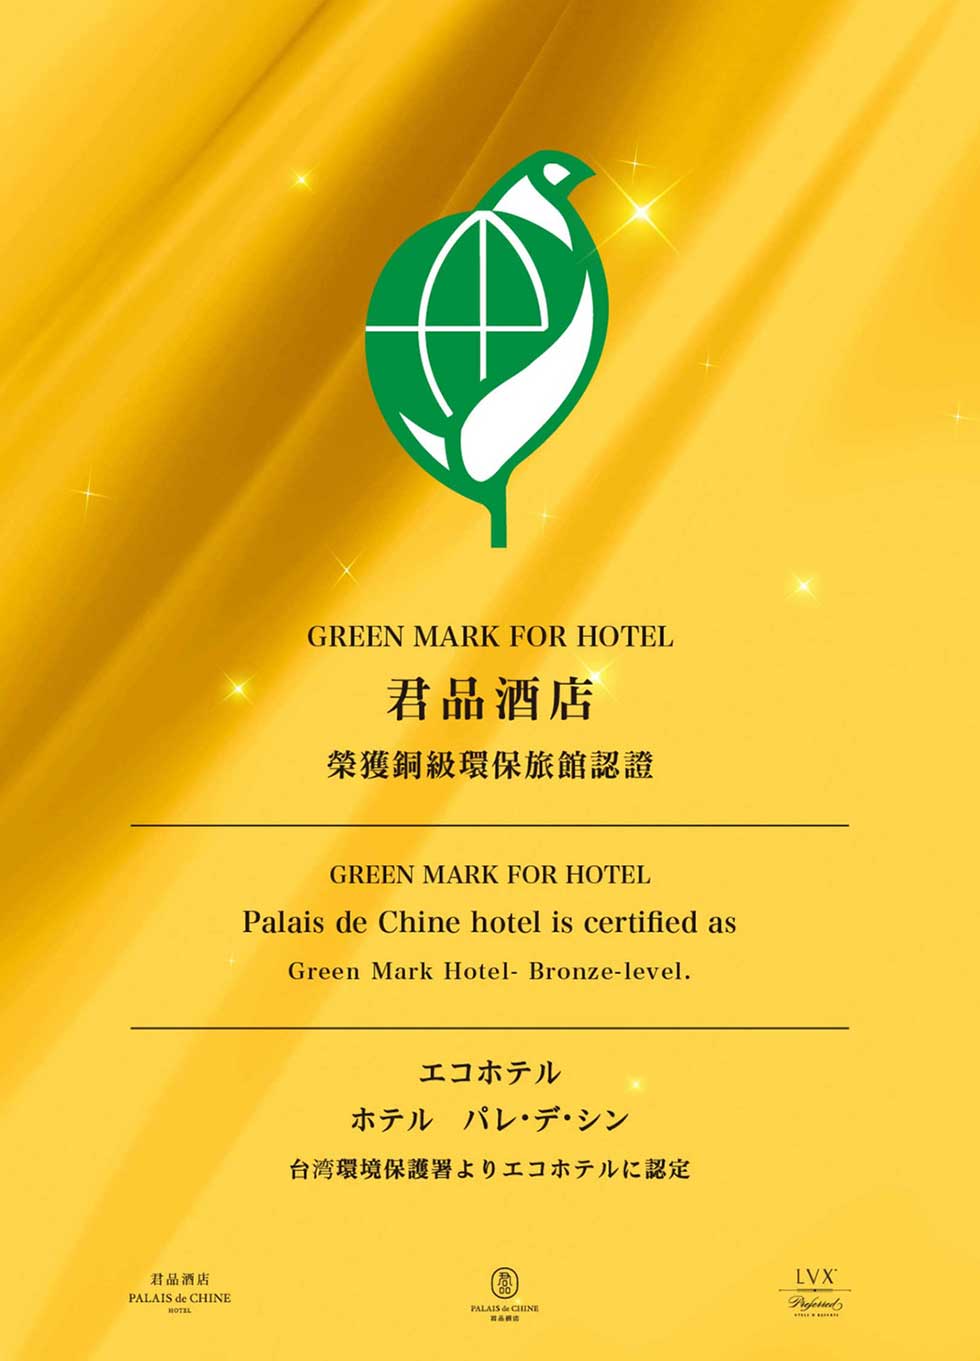 Palais de Chine was certified with the Bronze Level Green Mark as an eco-hotel